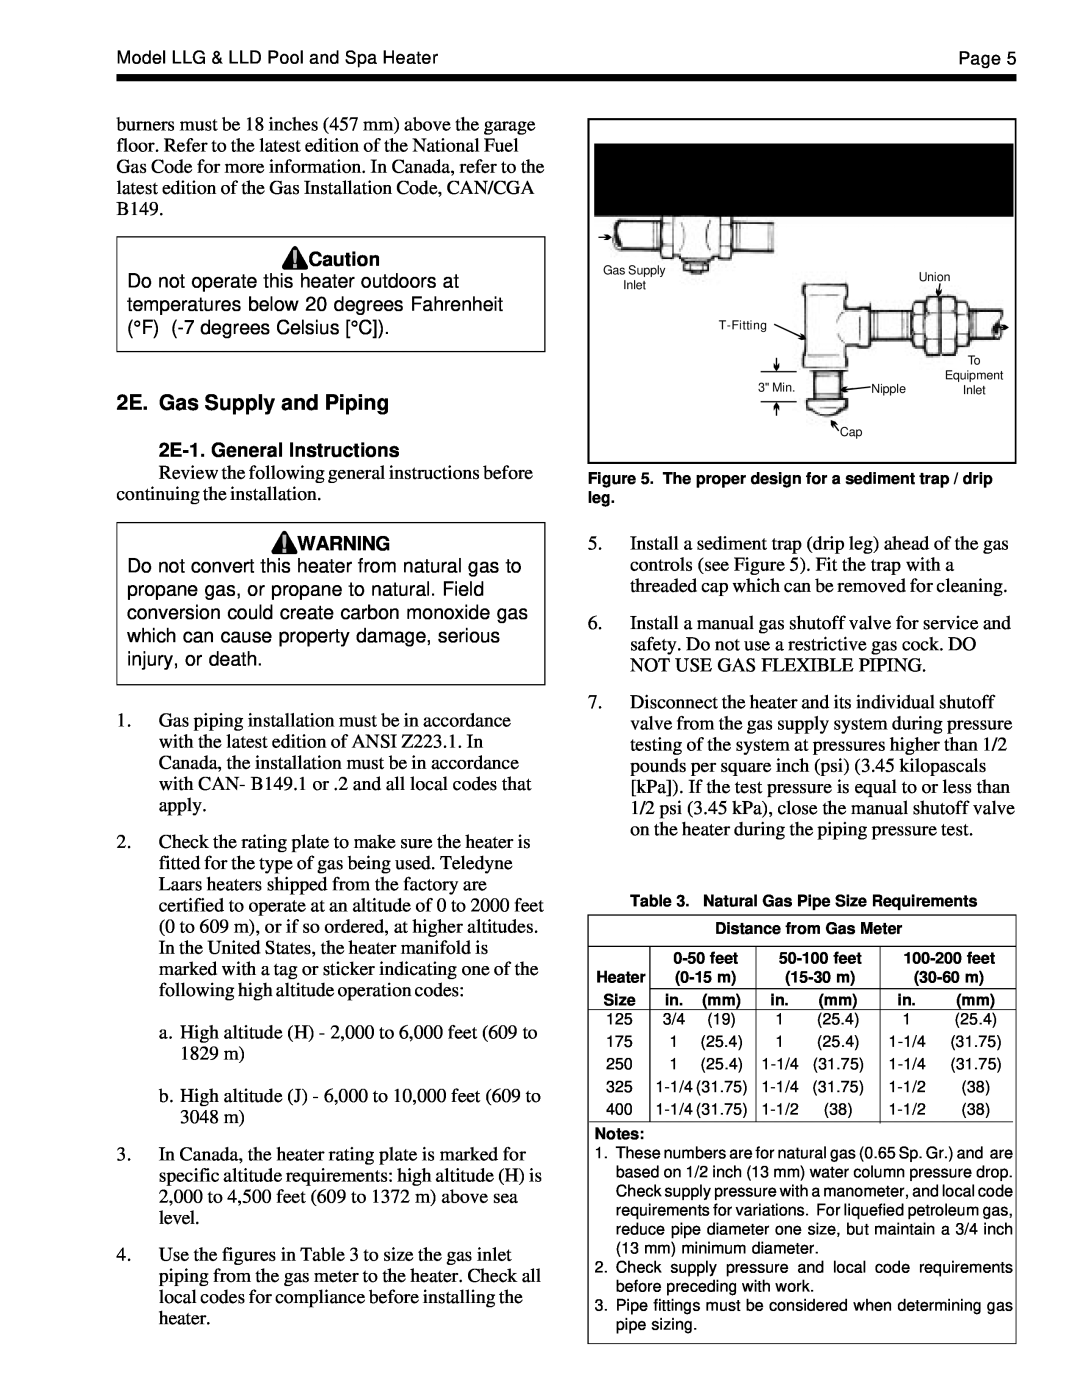 Teledyne LLG, LLD dimensions 2E. Gas Supply and Piping, 2E-1.General Instructions 